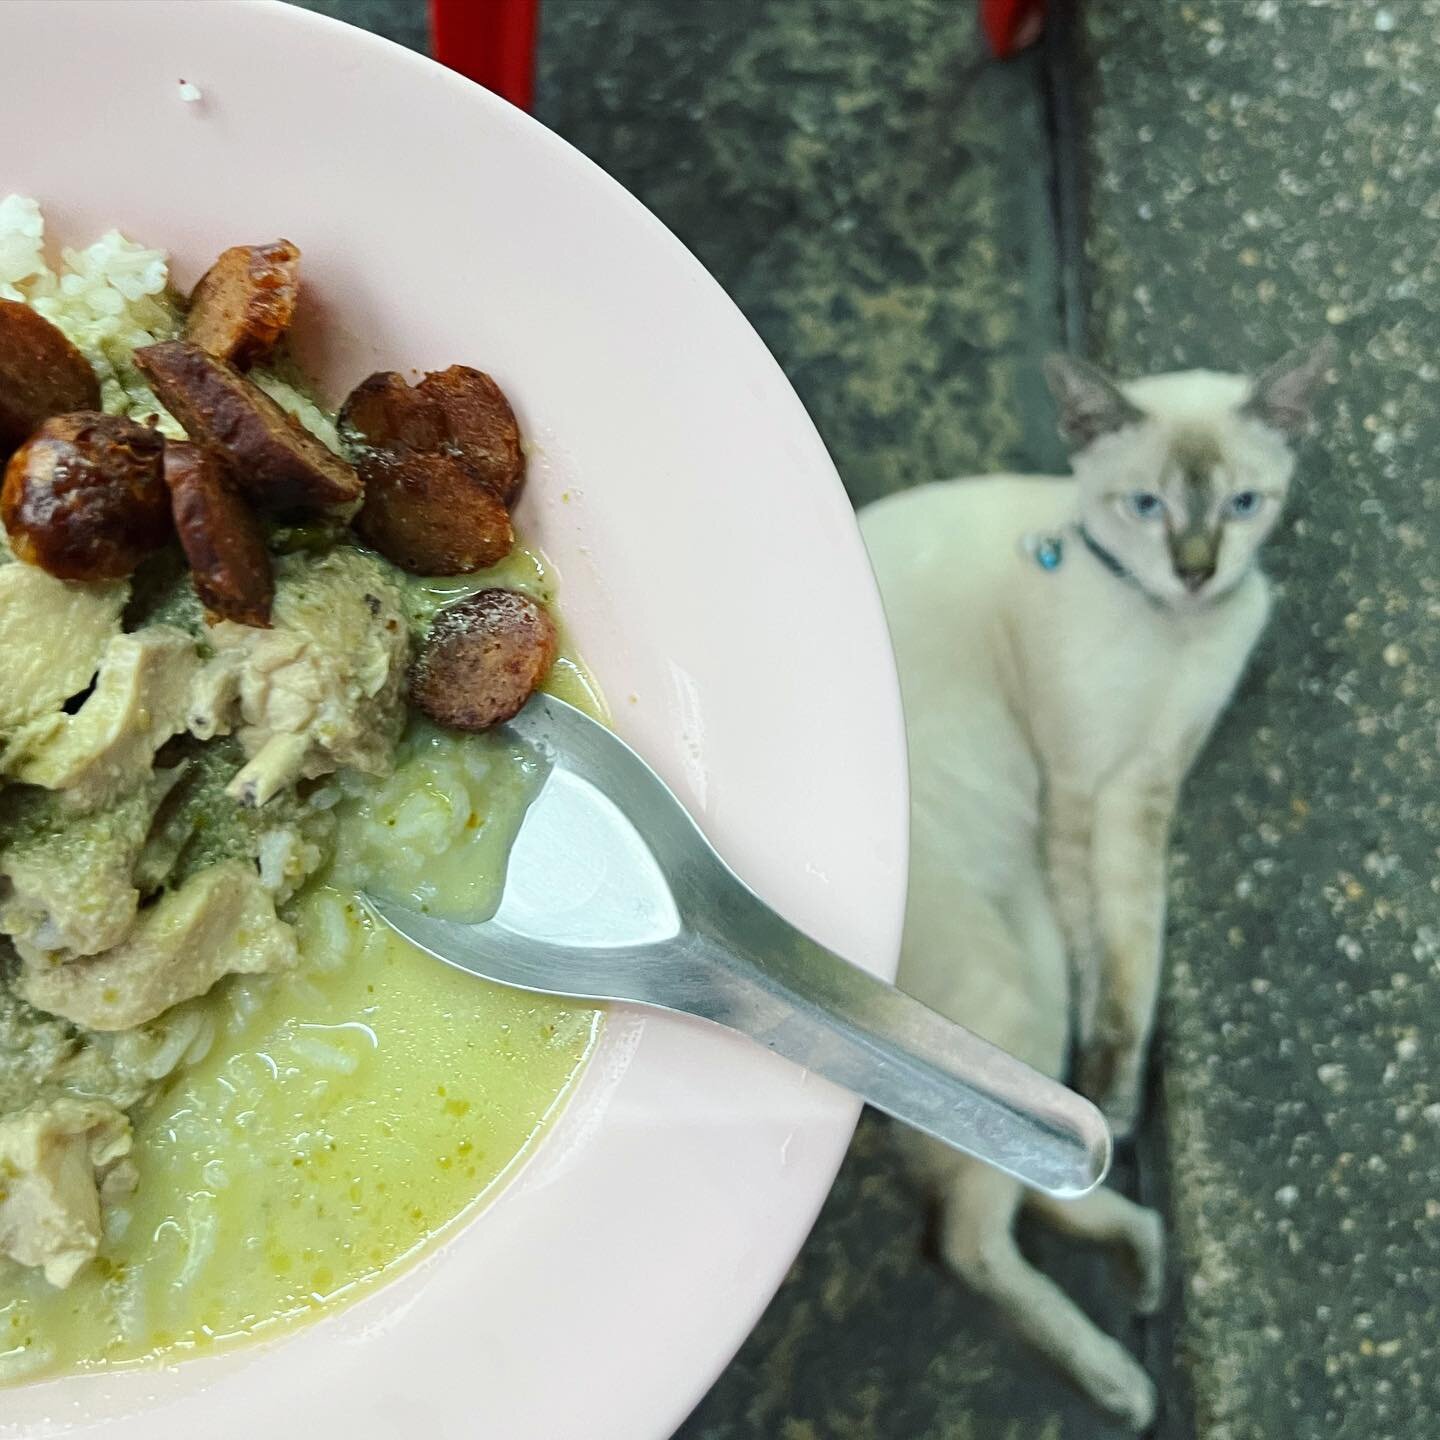 Green curry and sausage while being observed by a feline friend. That&rsquo;s what you get in Bangkok&rsquo;s Chinatown.
.
.
.

#bangkok #thailand #foodstagram #eatingfortheinsta #greencurry #streetfood #catsofinstagram #thaifood